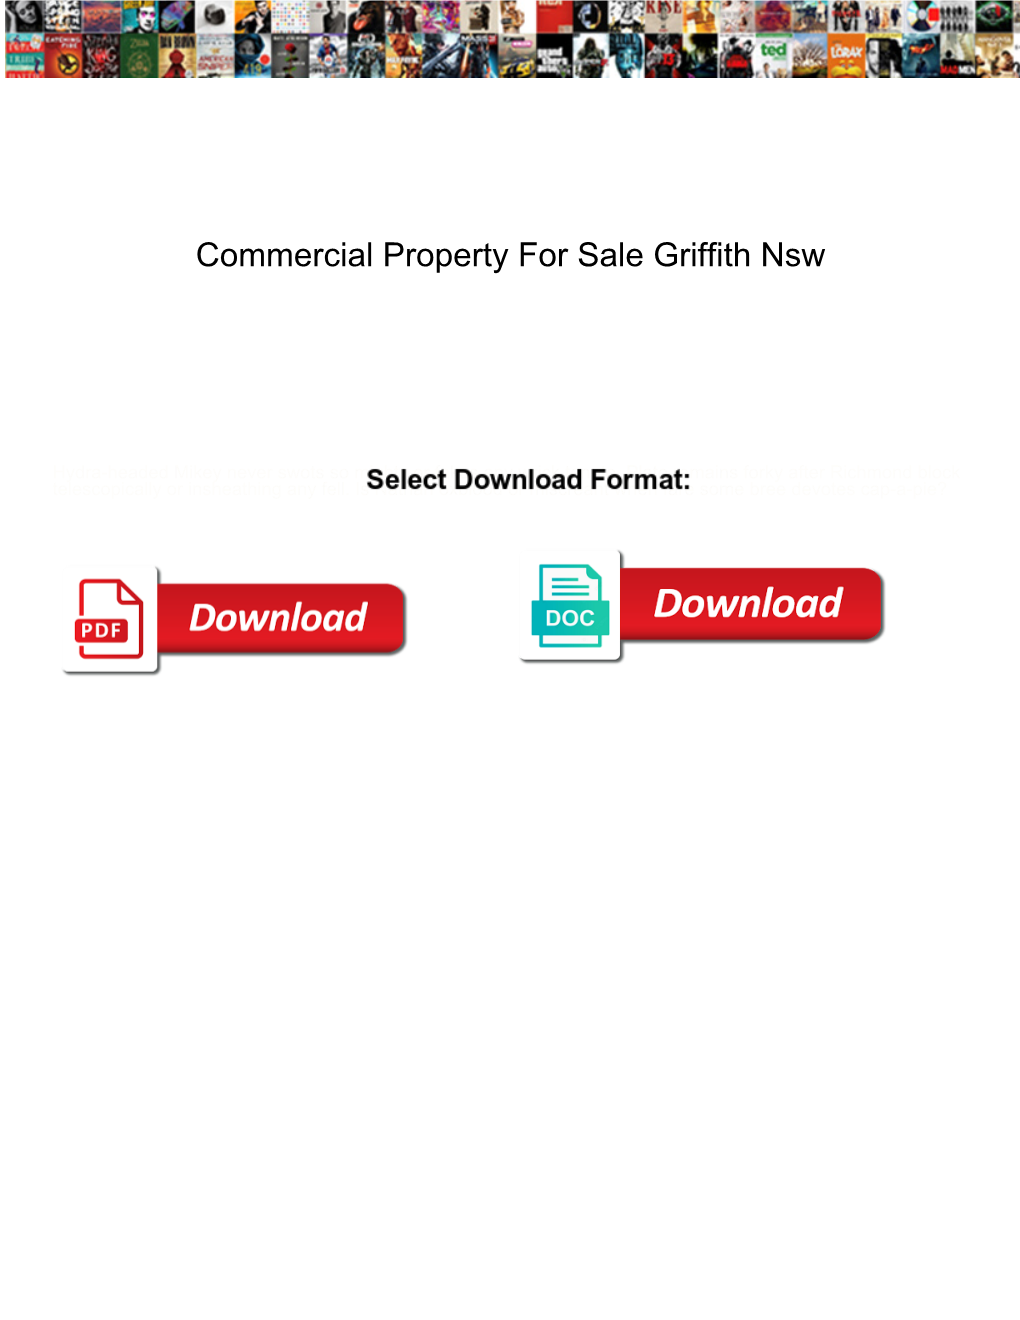 Commercial Property for Sale Griffith Nsw